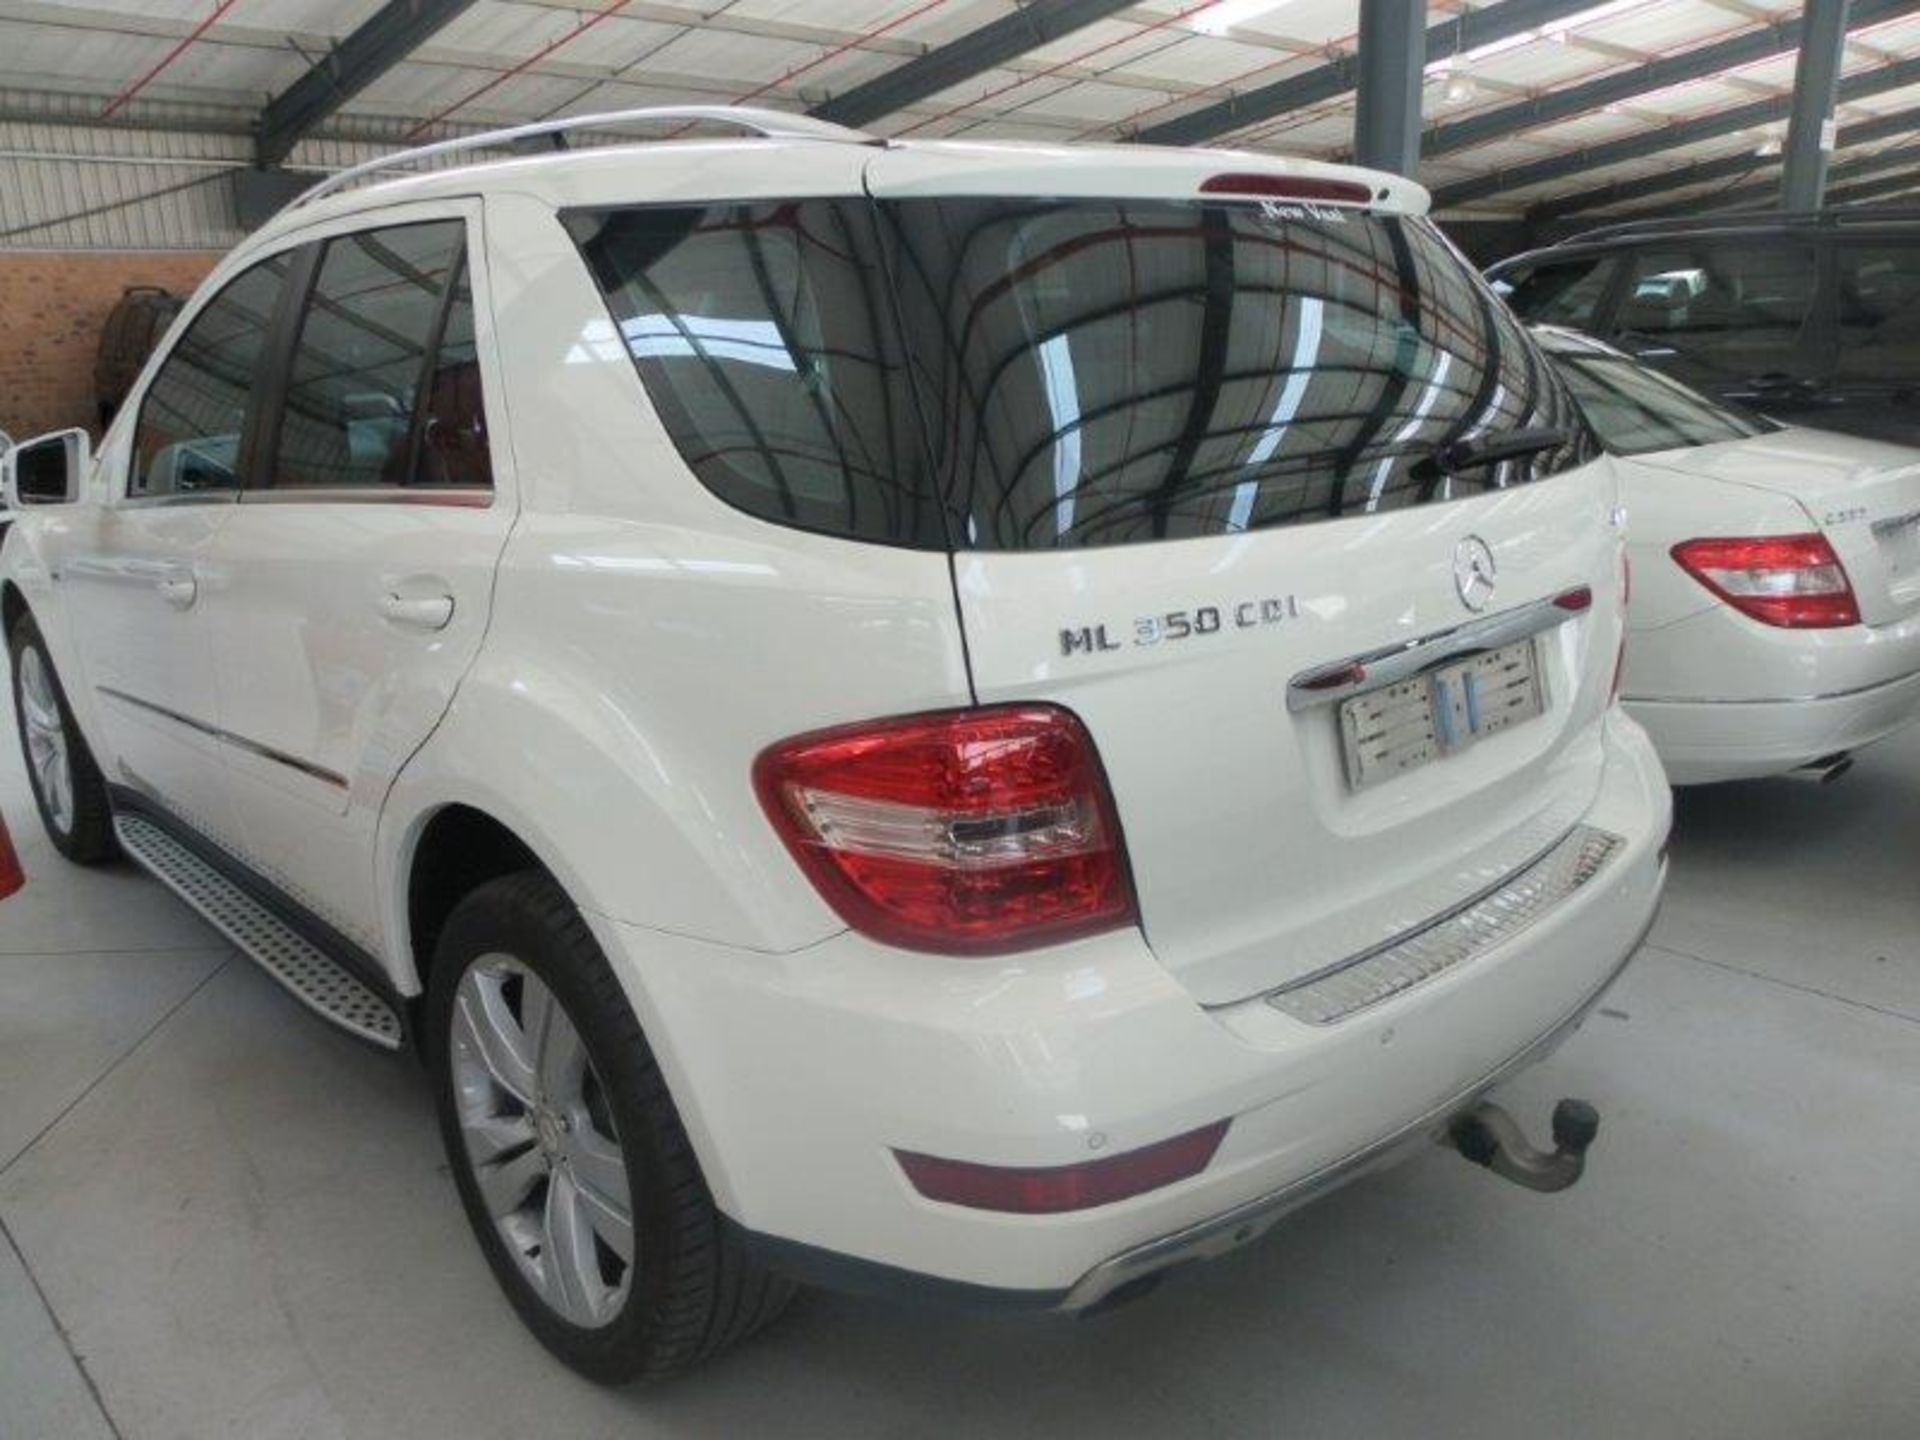 2011 MADOSINFS Mercedes-Benz ML350 CDI 4Matic (Vin No: WDC1641222A656827 )(50023 kms) Suggested - Image 4 of 5